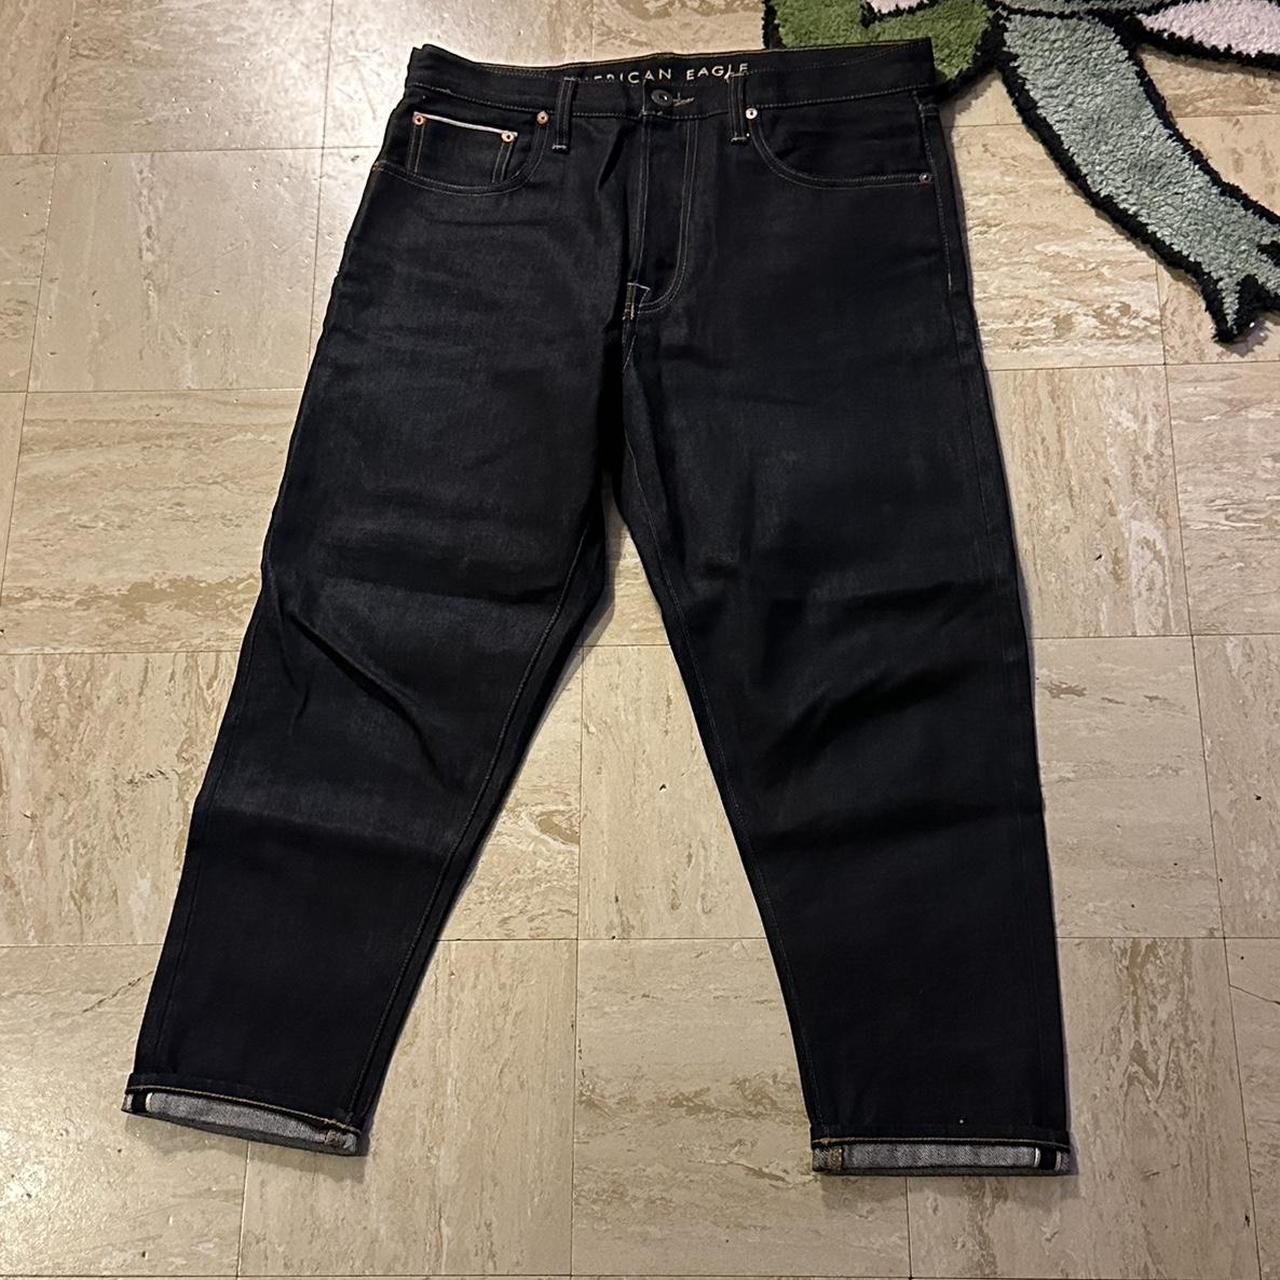 American Eagle Outfitters Men's Navy Jeans | Depop